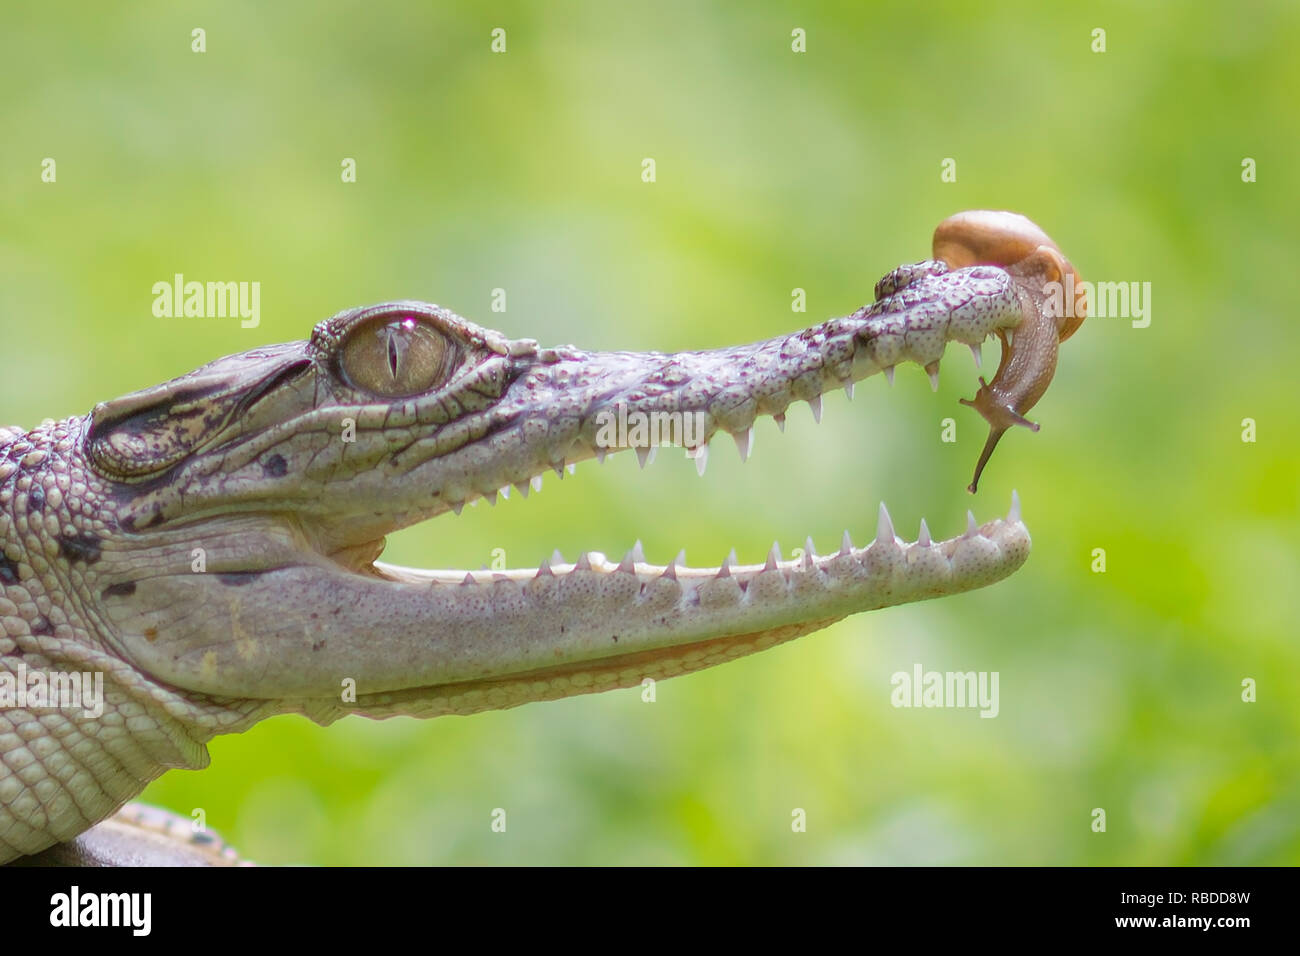 SOUTH JAKARTA, INDONESIA: HILARIOUS images show the moment a brave snail slowly ventured inside the open jaws of a crocodile. The series of unusual photos show the daring snail slither to the tip of the reptile’s nose before peering inside the its mouth and eventually moving inside. In one final shot, the snail can be seen resting on the roof of the croc’s mouth. The incredible photographs were taken by Roni Kurniawan (26) from Pondok Pinang, Jakarta, Indonesia just outside of South Jakarta. To take the photos, Roni used a Canon 600D camera. Roni Kurniawan / mediadrumworld.com Stock Photo